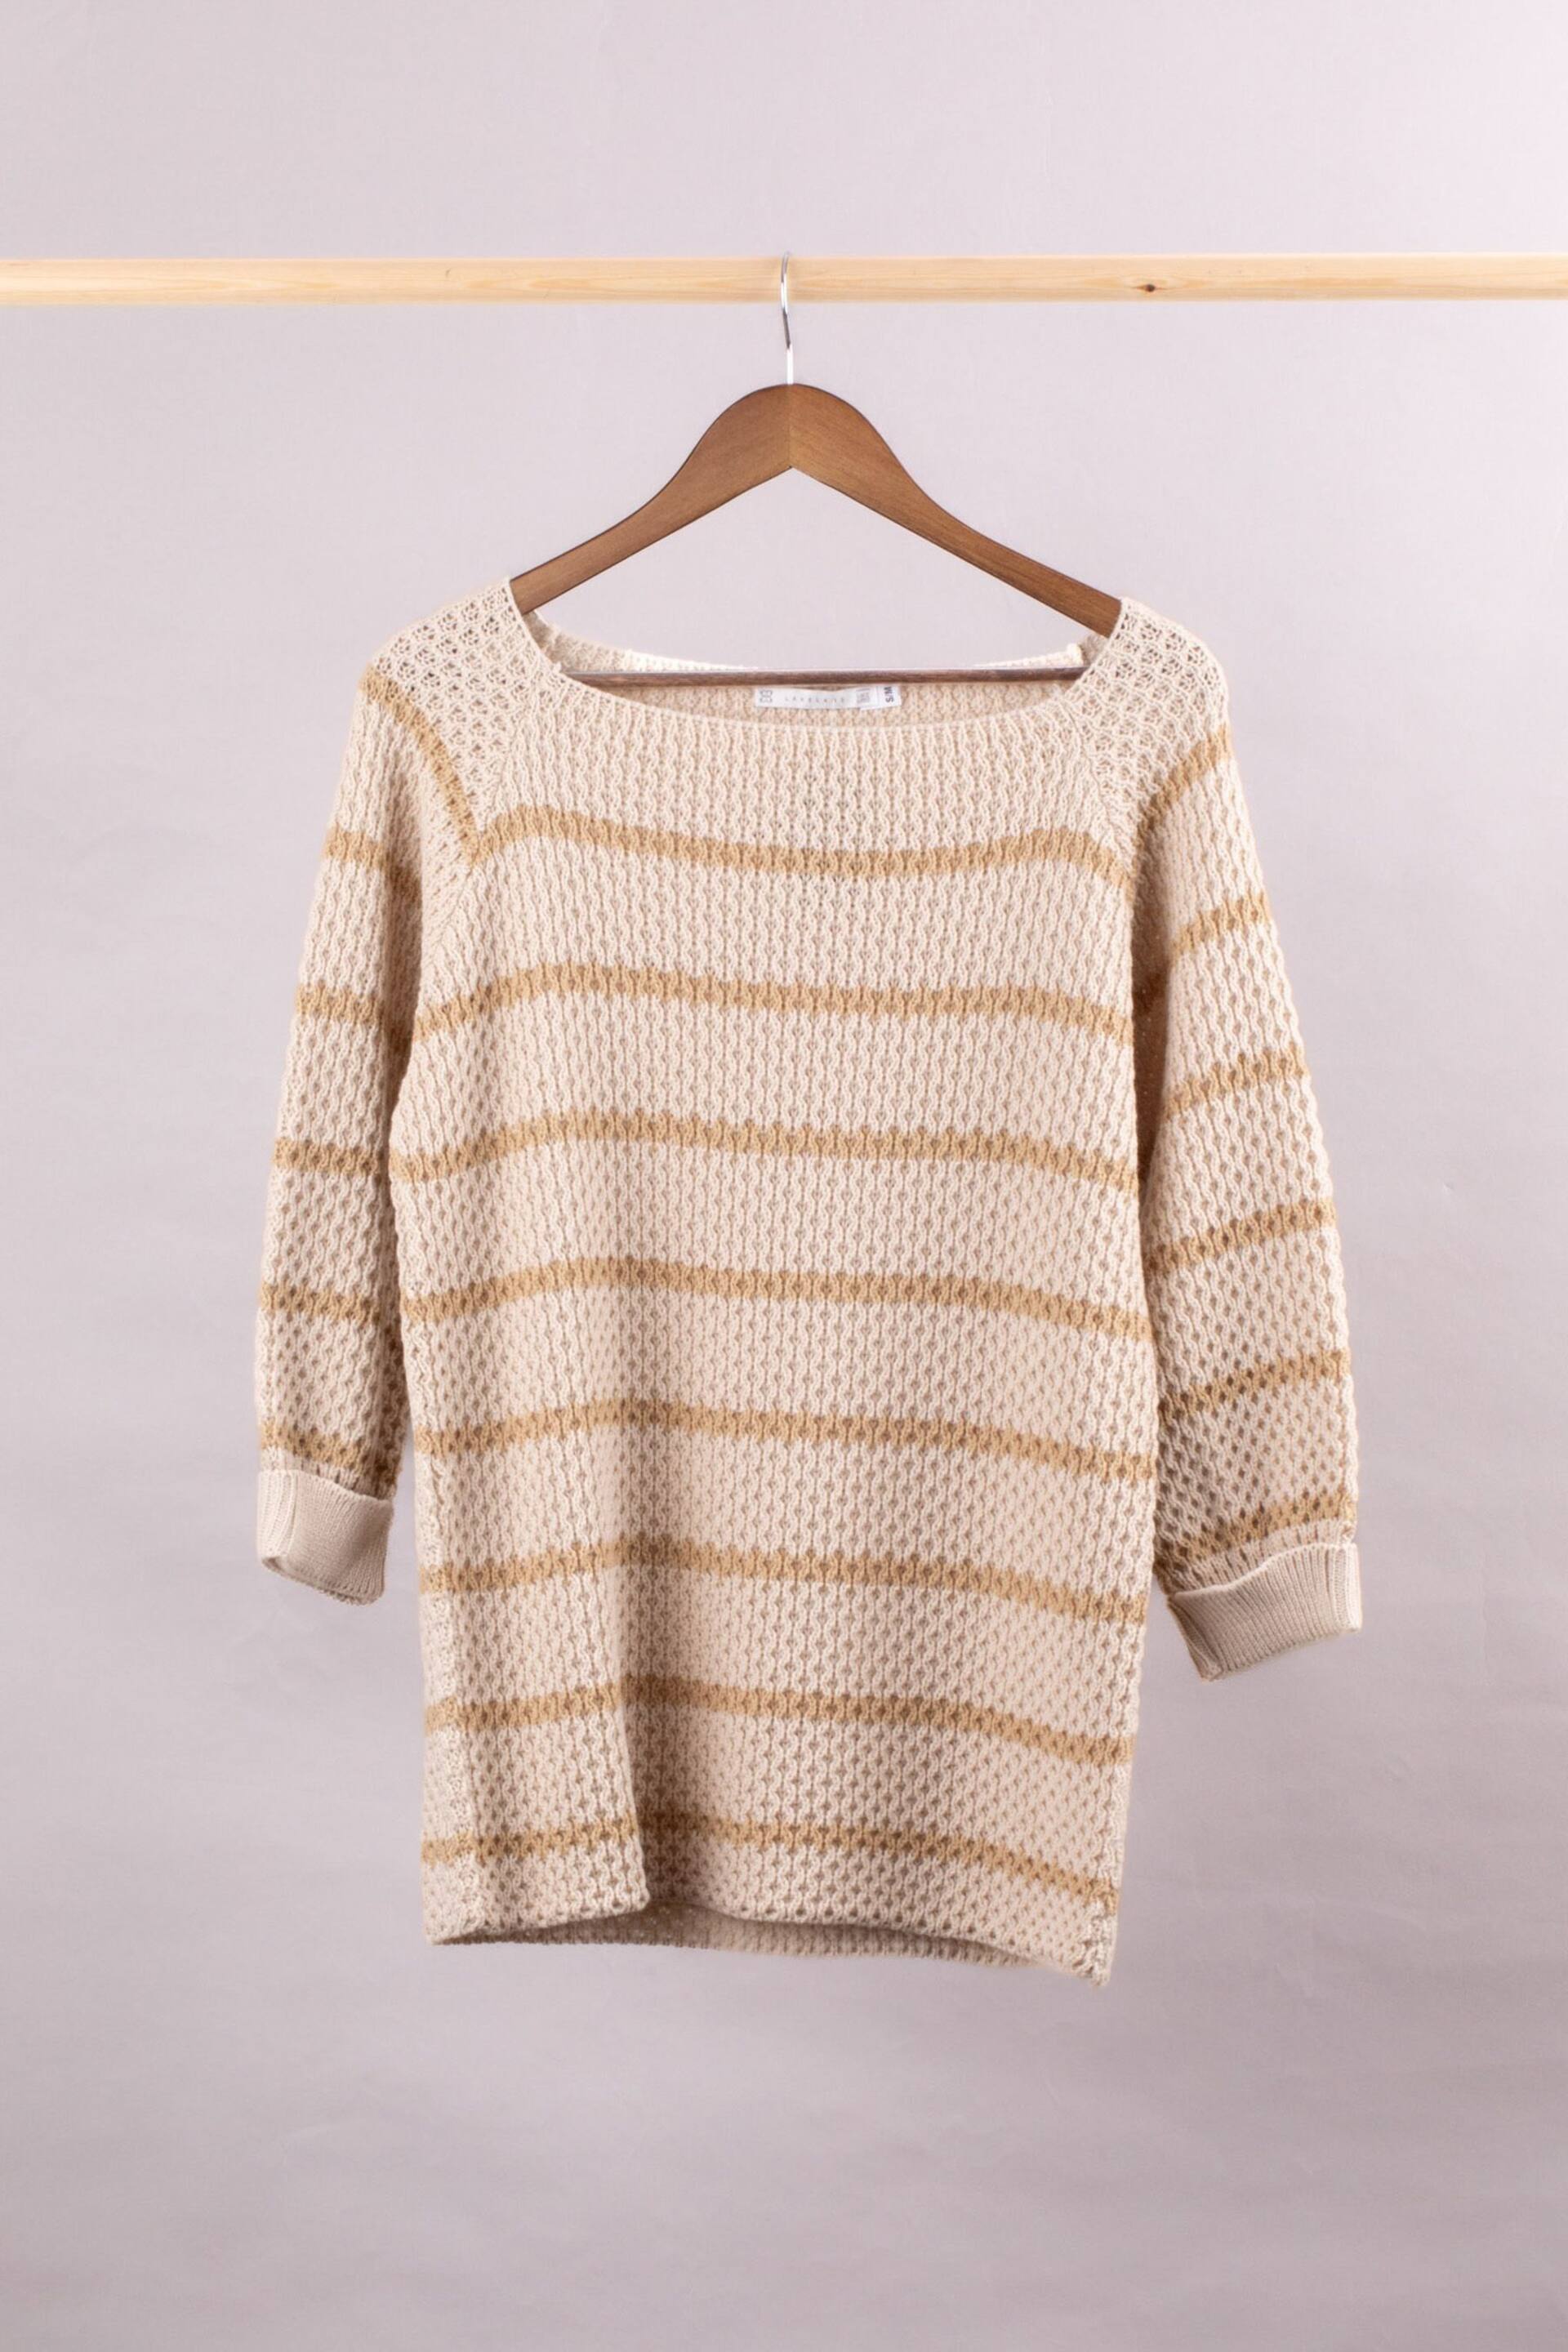 Lakeland Clothing Maisie Relaxed Nude Jumper - Image 1 of 3